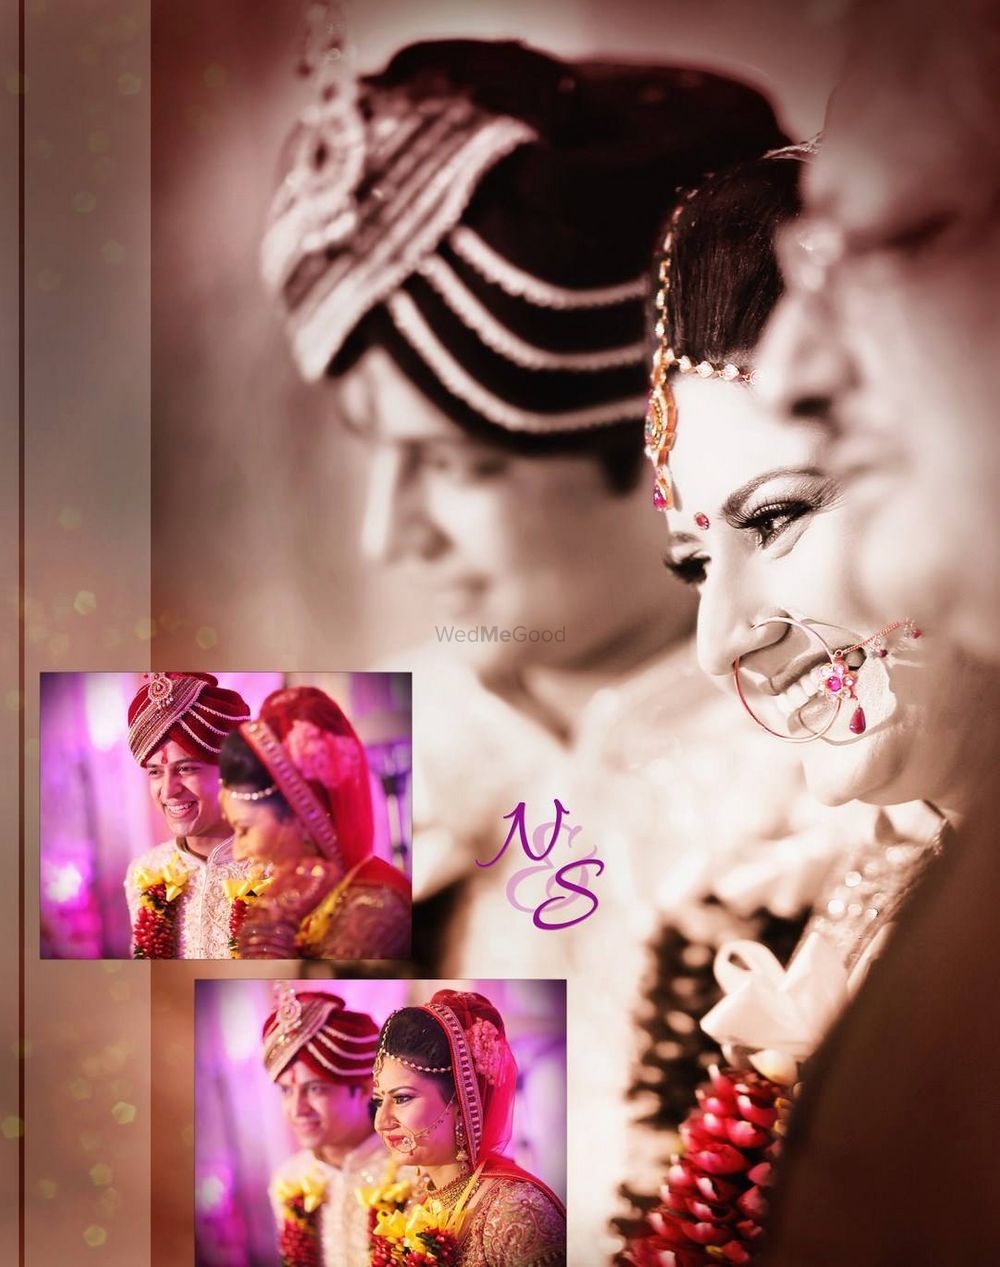 Photo From Elegant shots from Wedding collection - By Dipak Studios